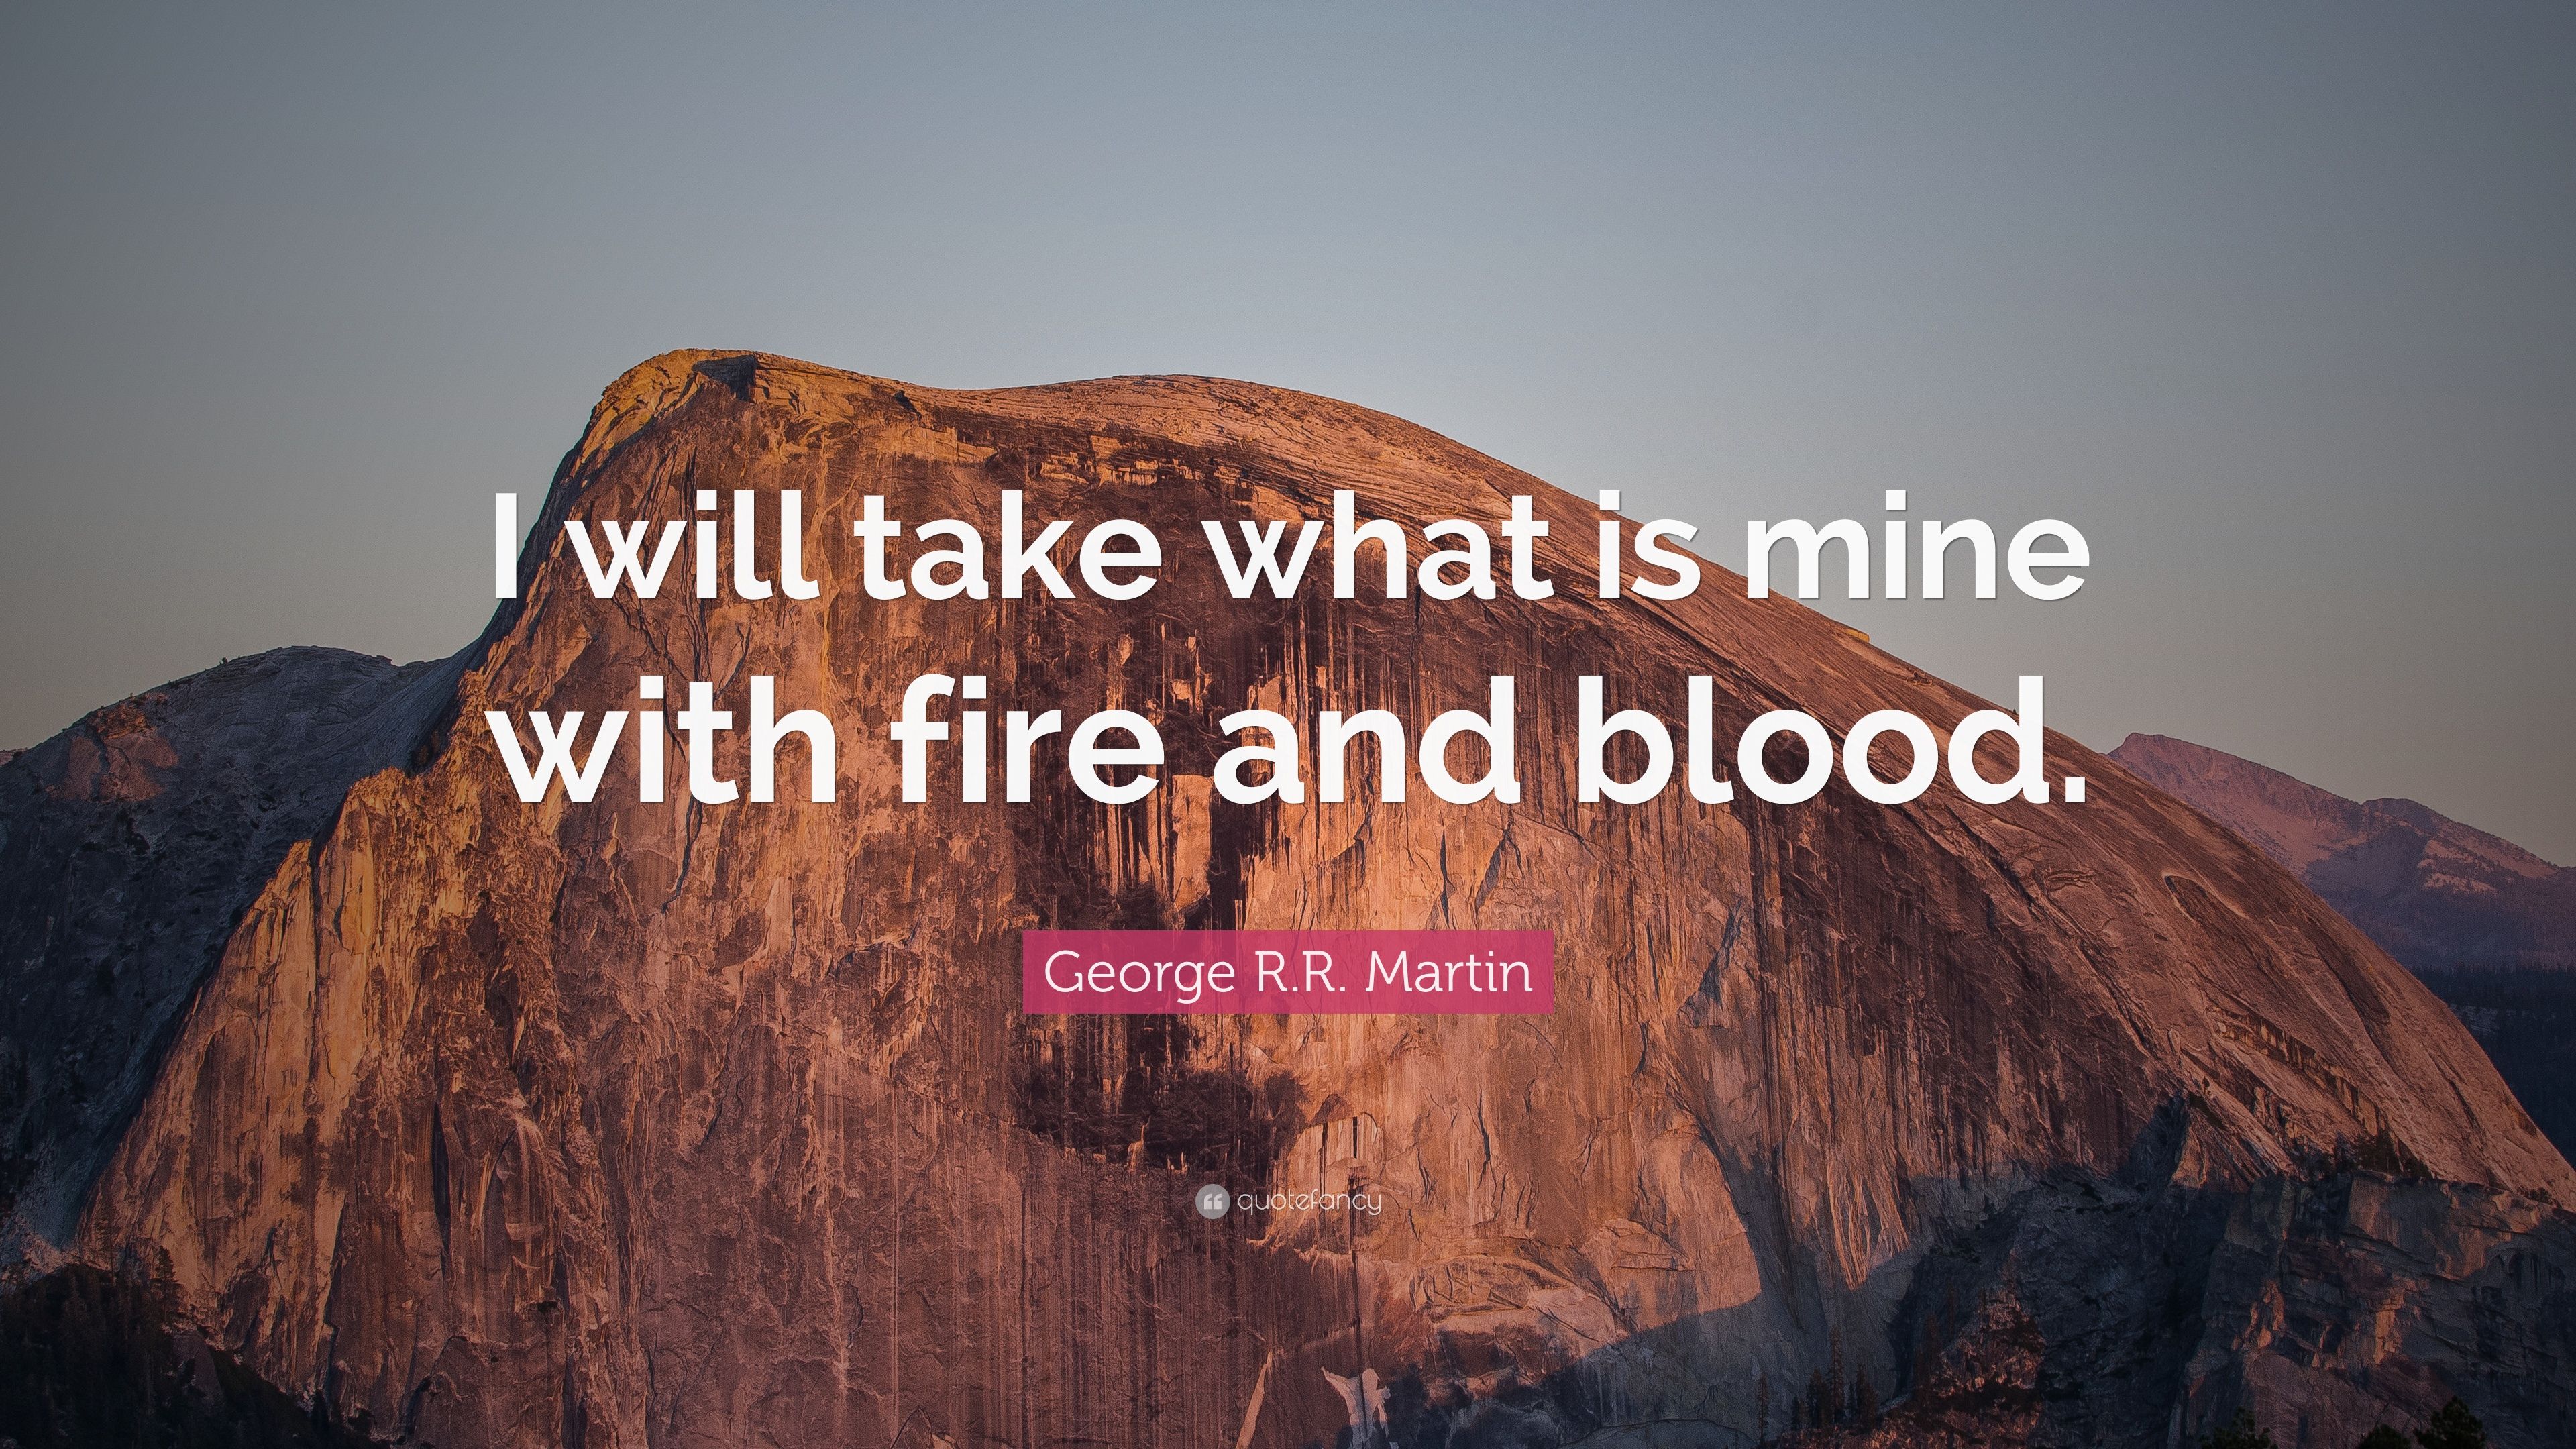 George R.R. Martin Quote: “I will take what is mine with fire and